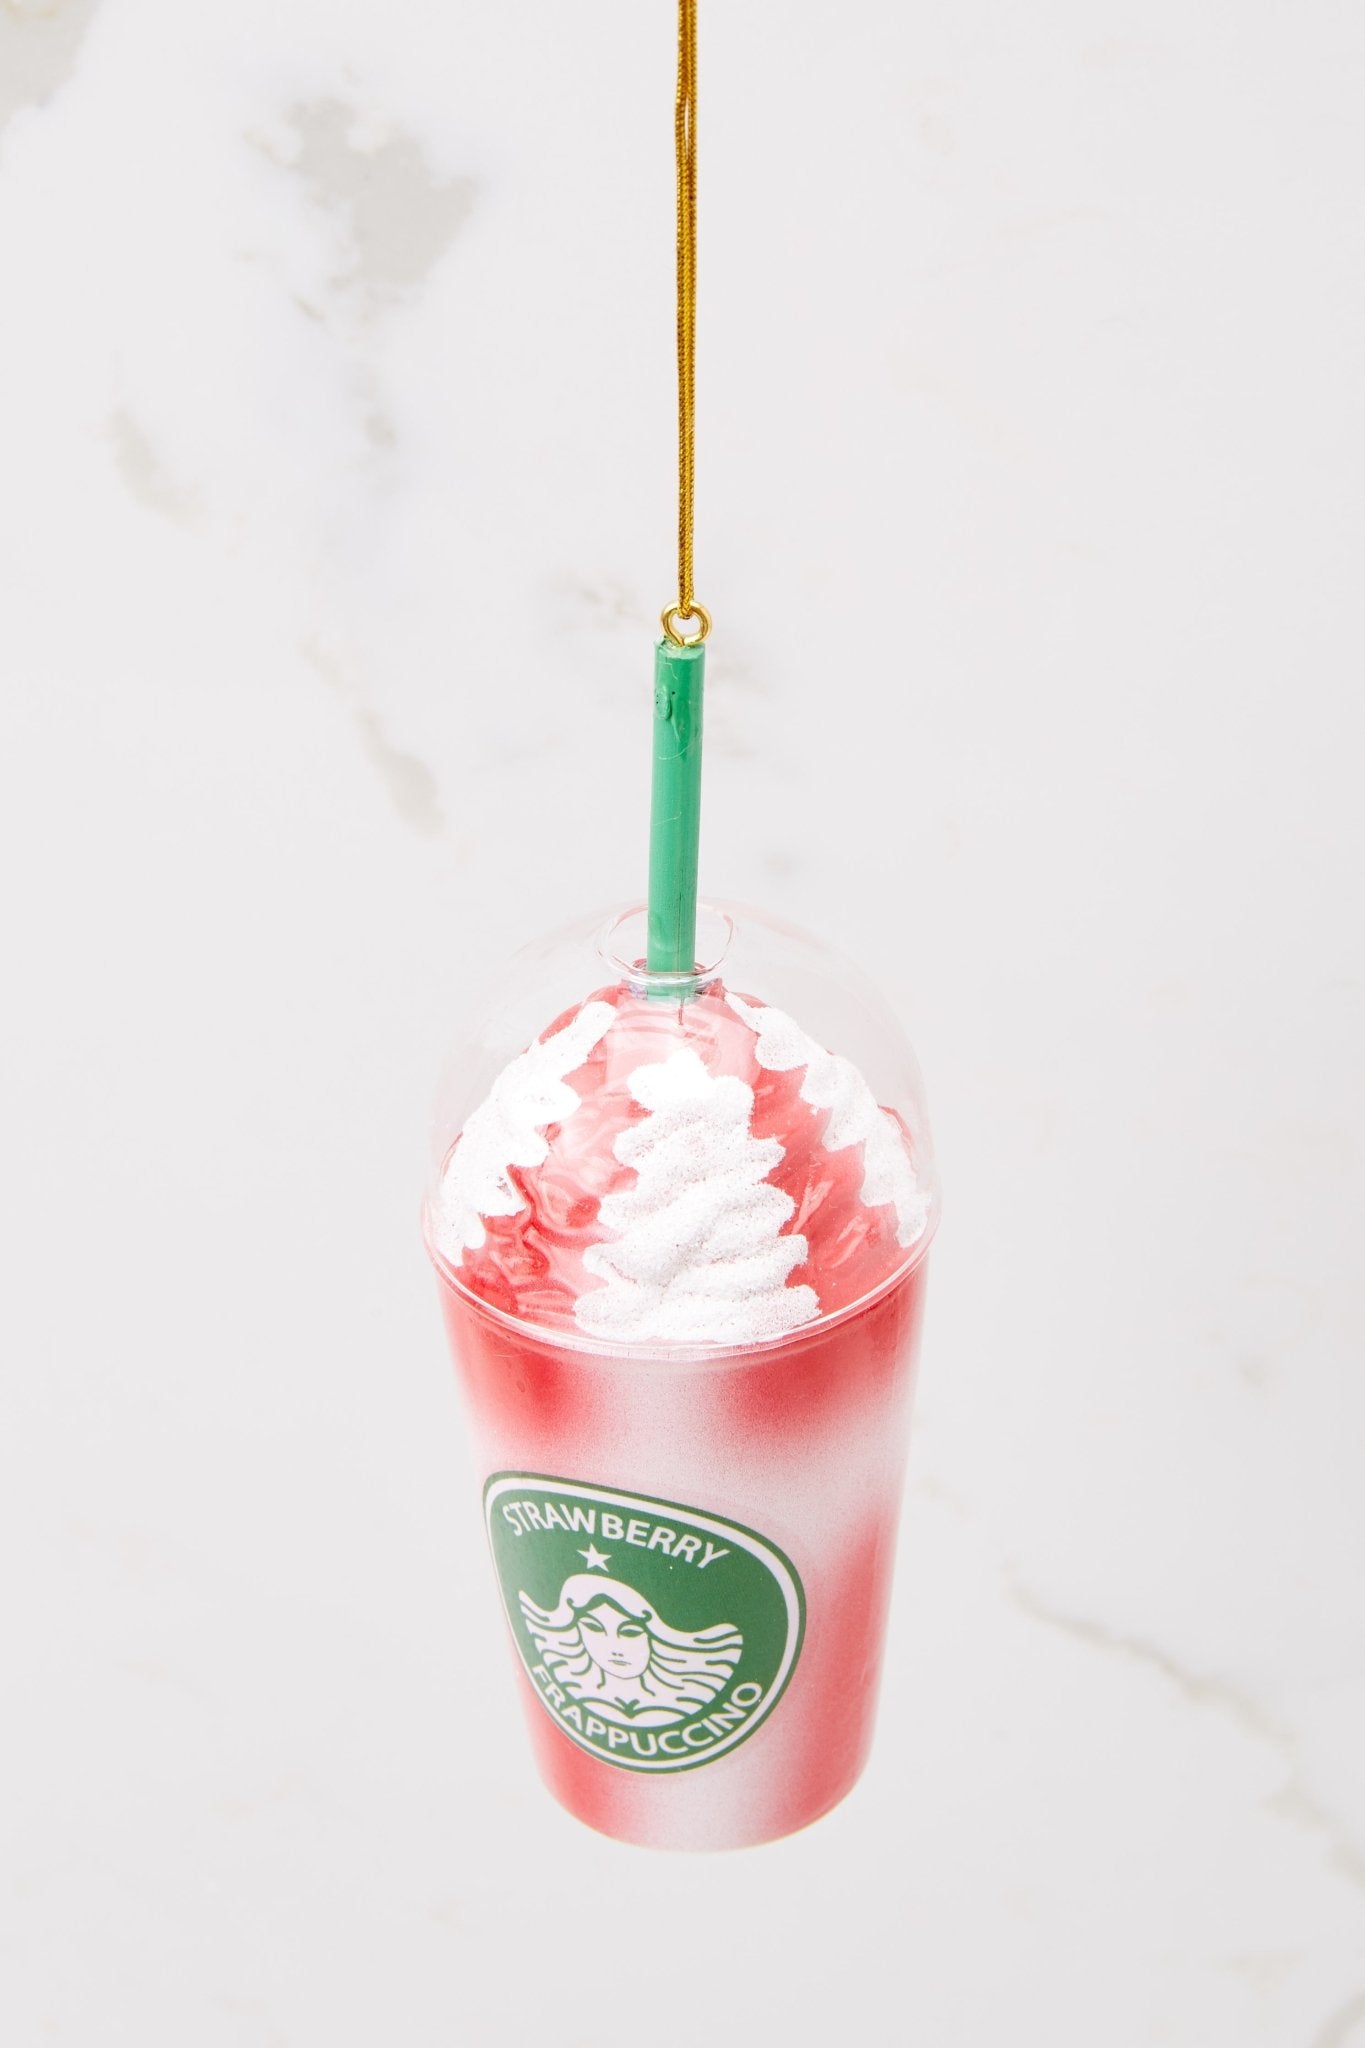 Top view of this ornament that features a "STRAWBERRY FRAPPUCCINO" with white and red cool whip on the top and a green straw.